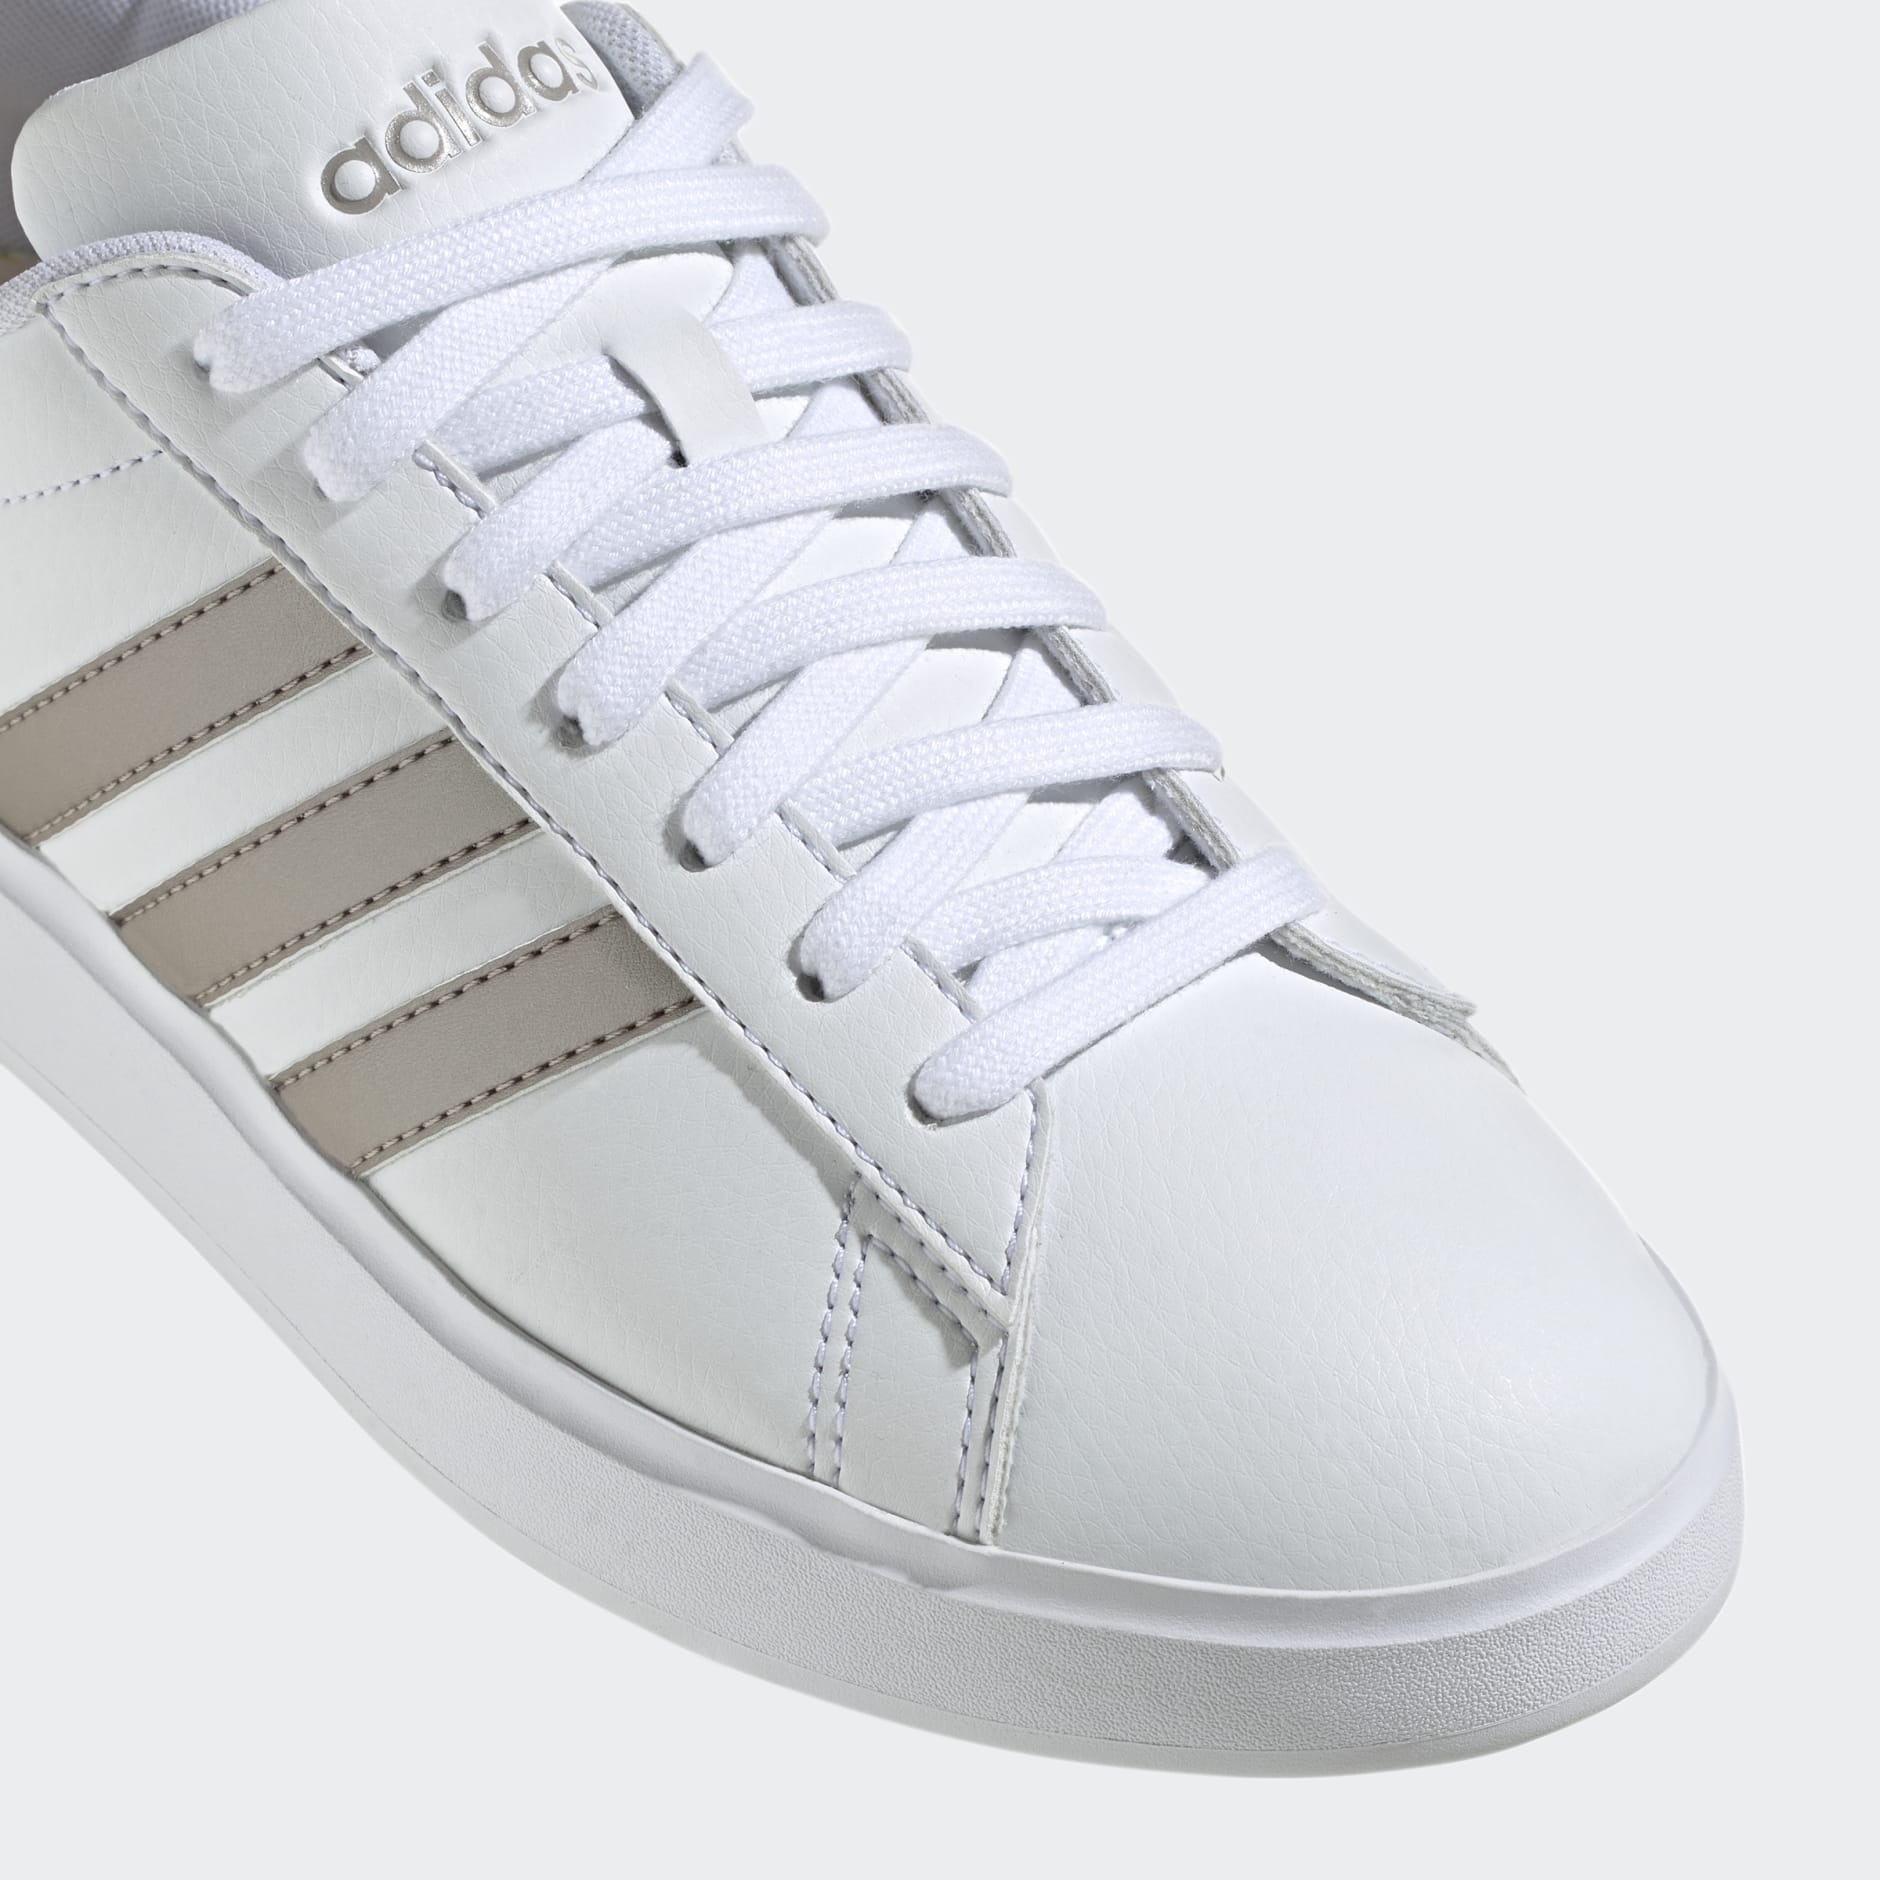 adidas Grand Court Cloudfoam Lifestyle Court Comfort Shoes White